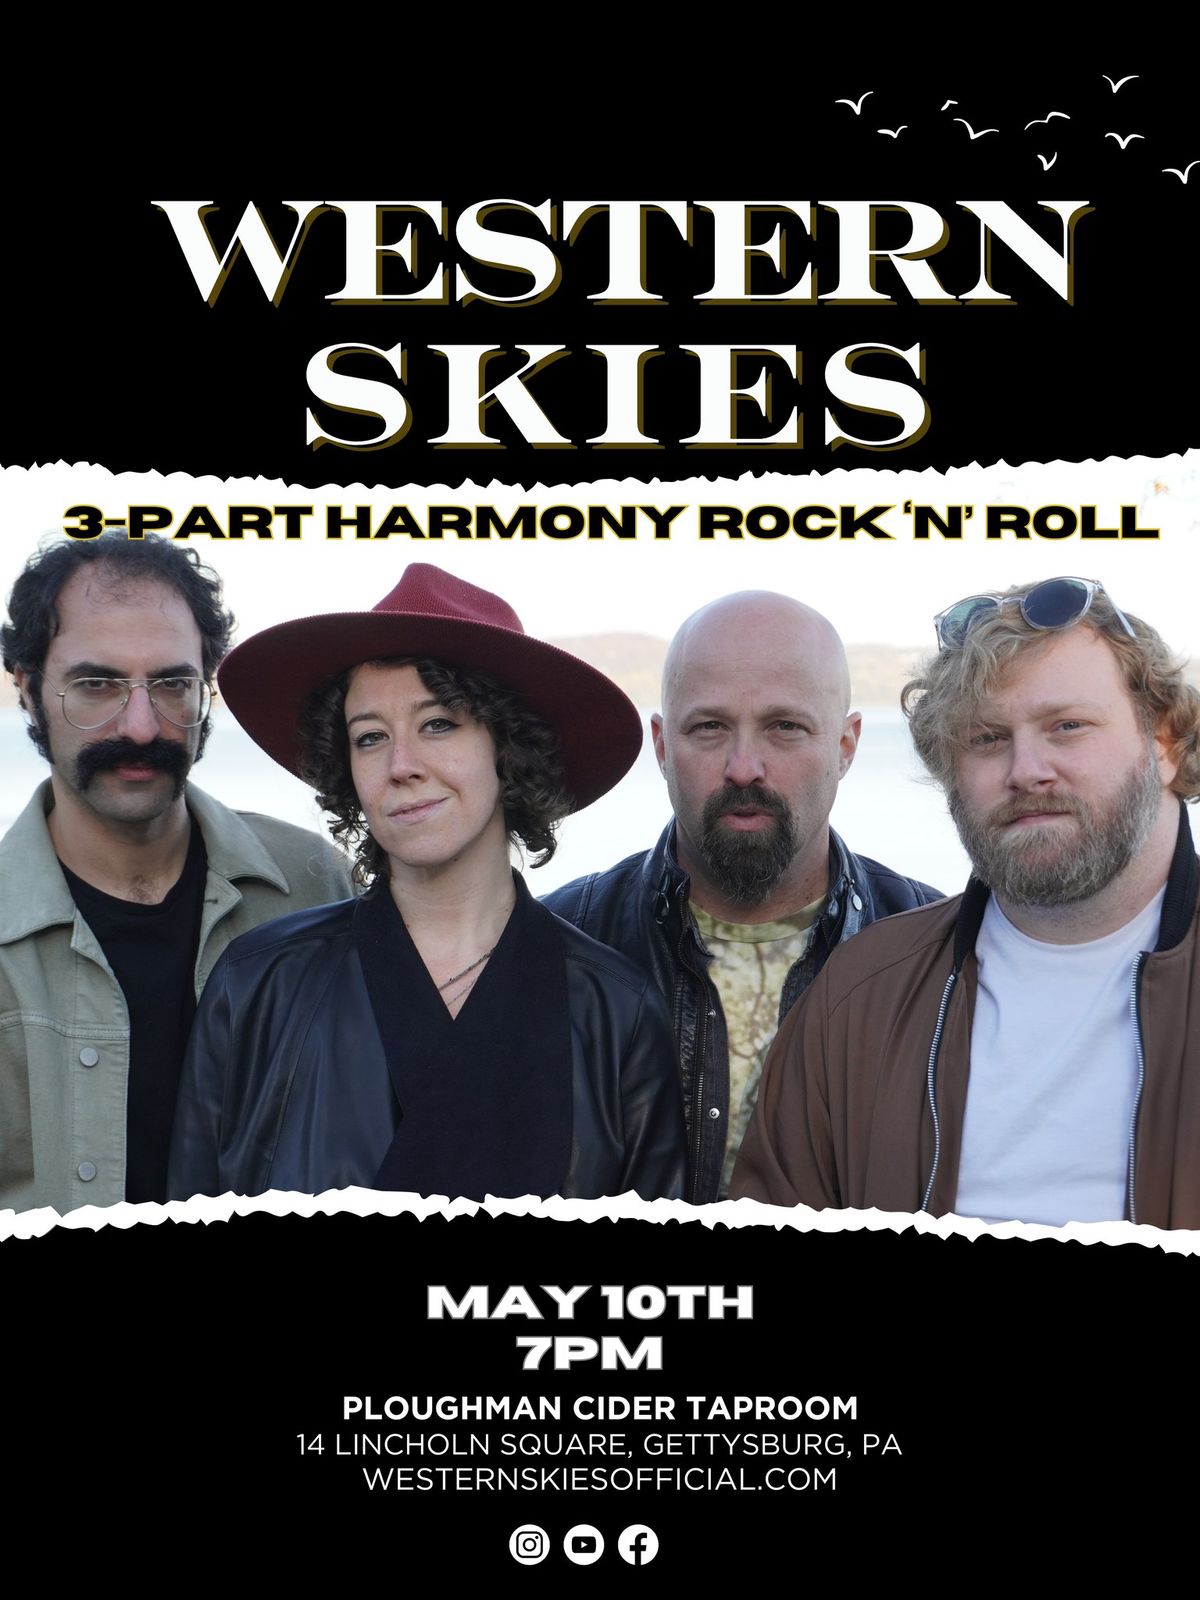 Western Skies Plays Live on Friday Night at the Art Oasis Stage!